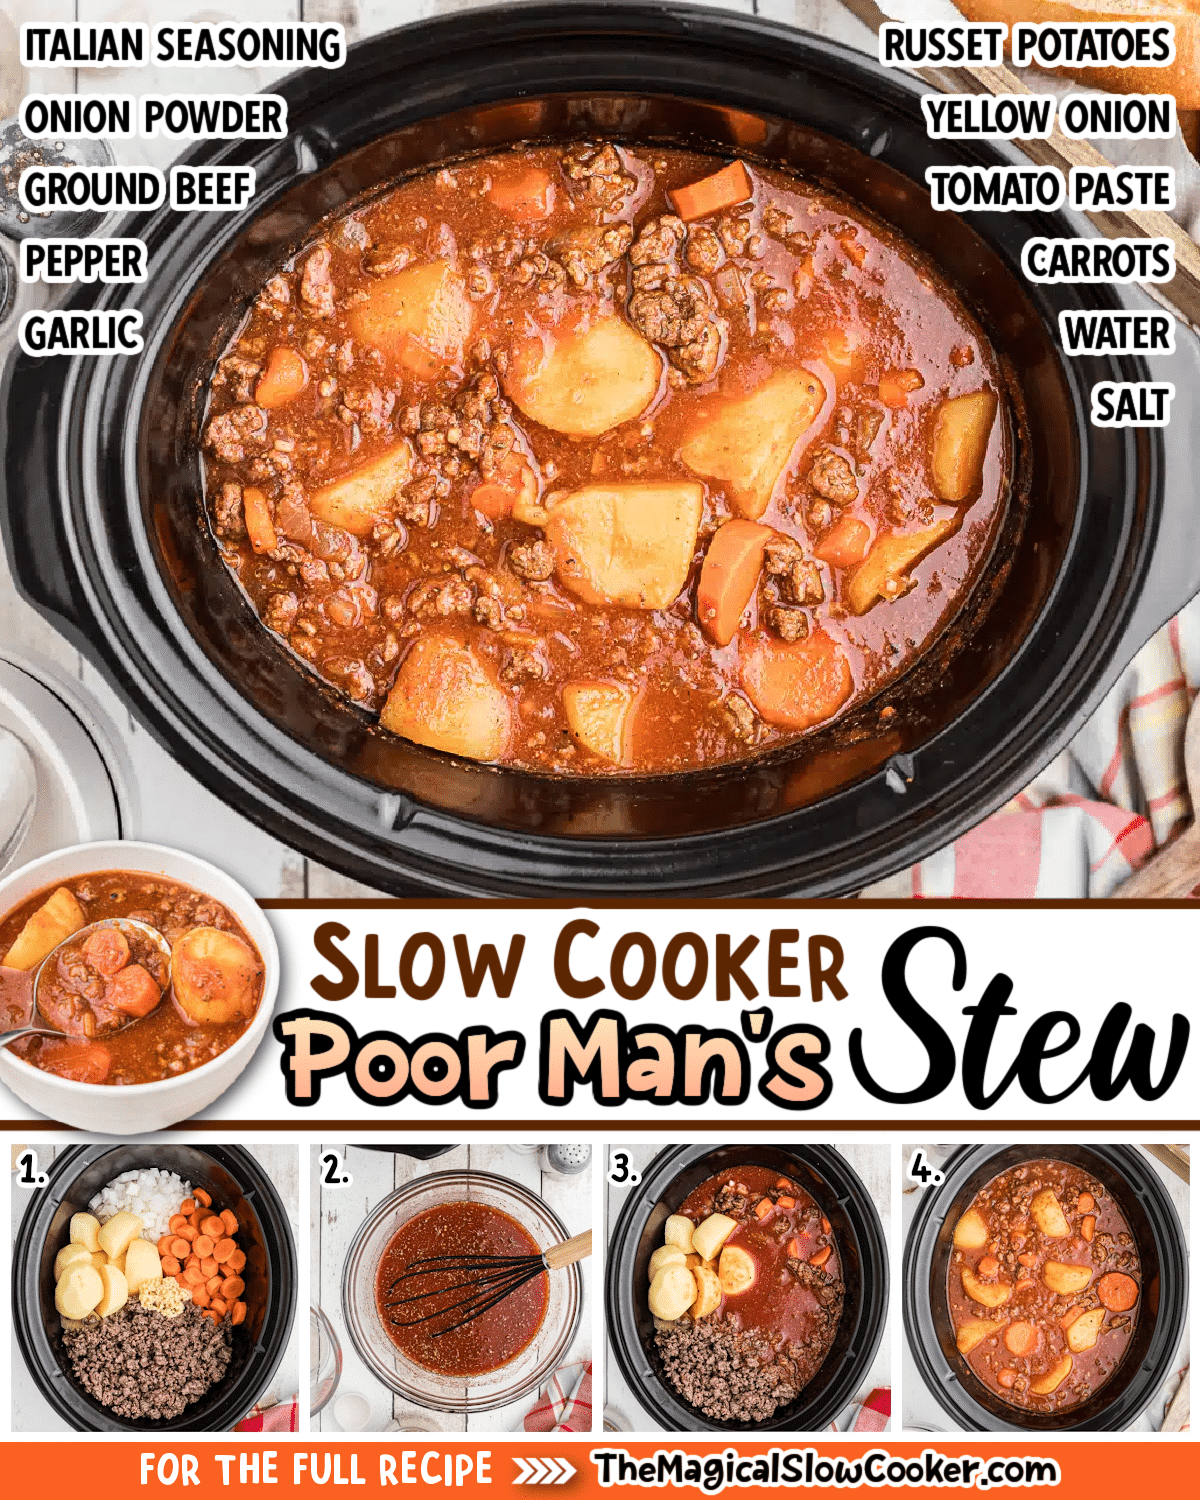 Poor man's Stew images with text of what the ingredients are.